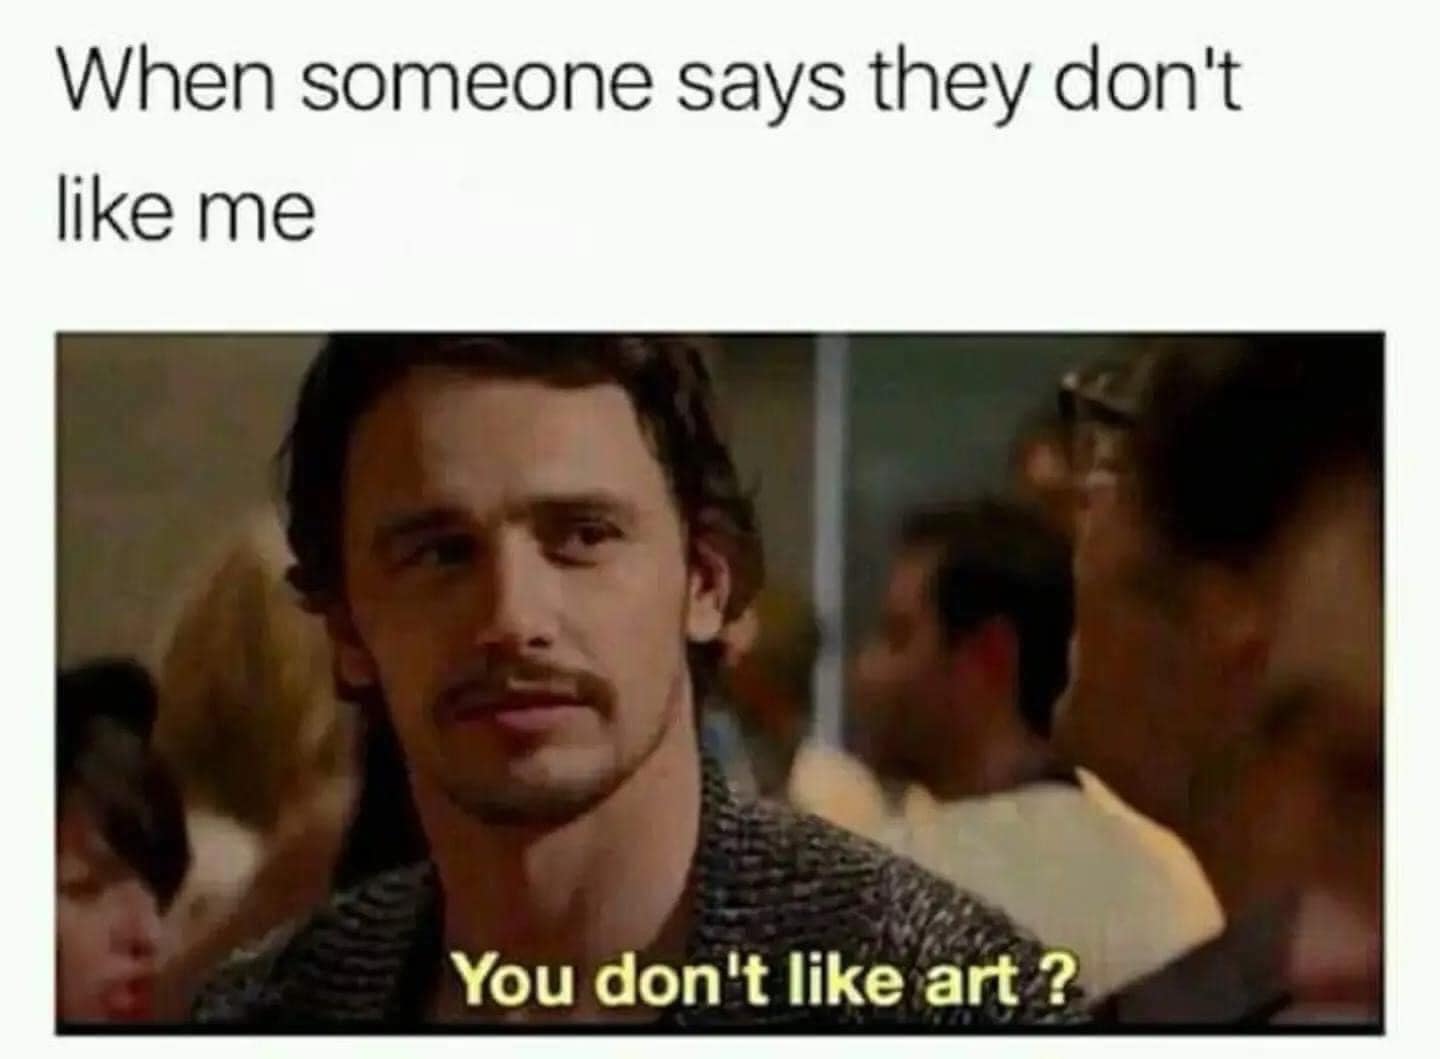 when someone says they don't like me, you don't like art?, meme, james franco